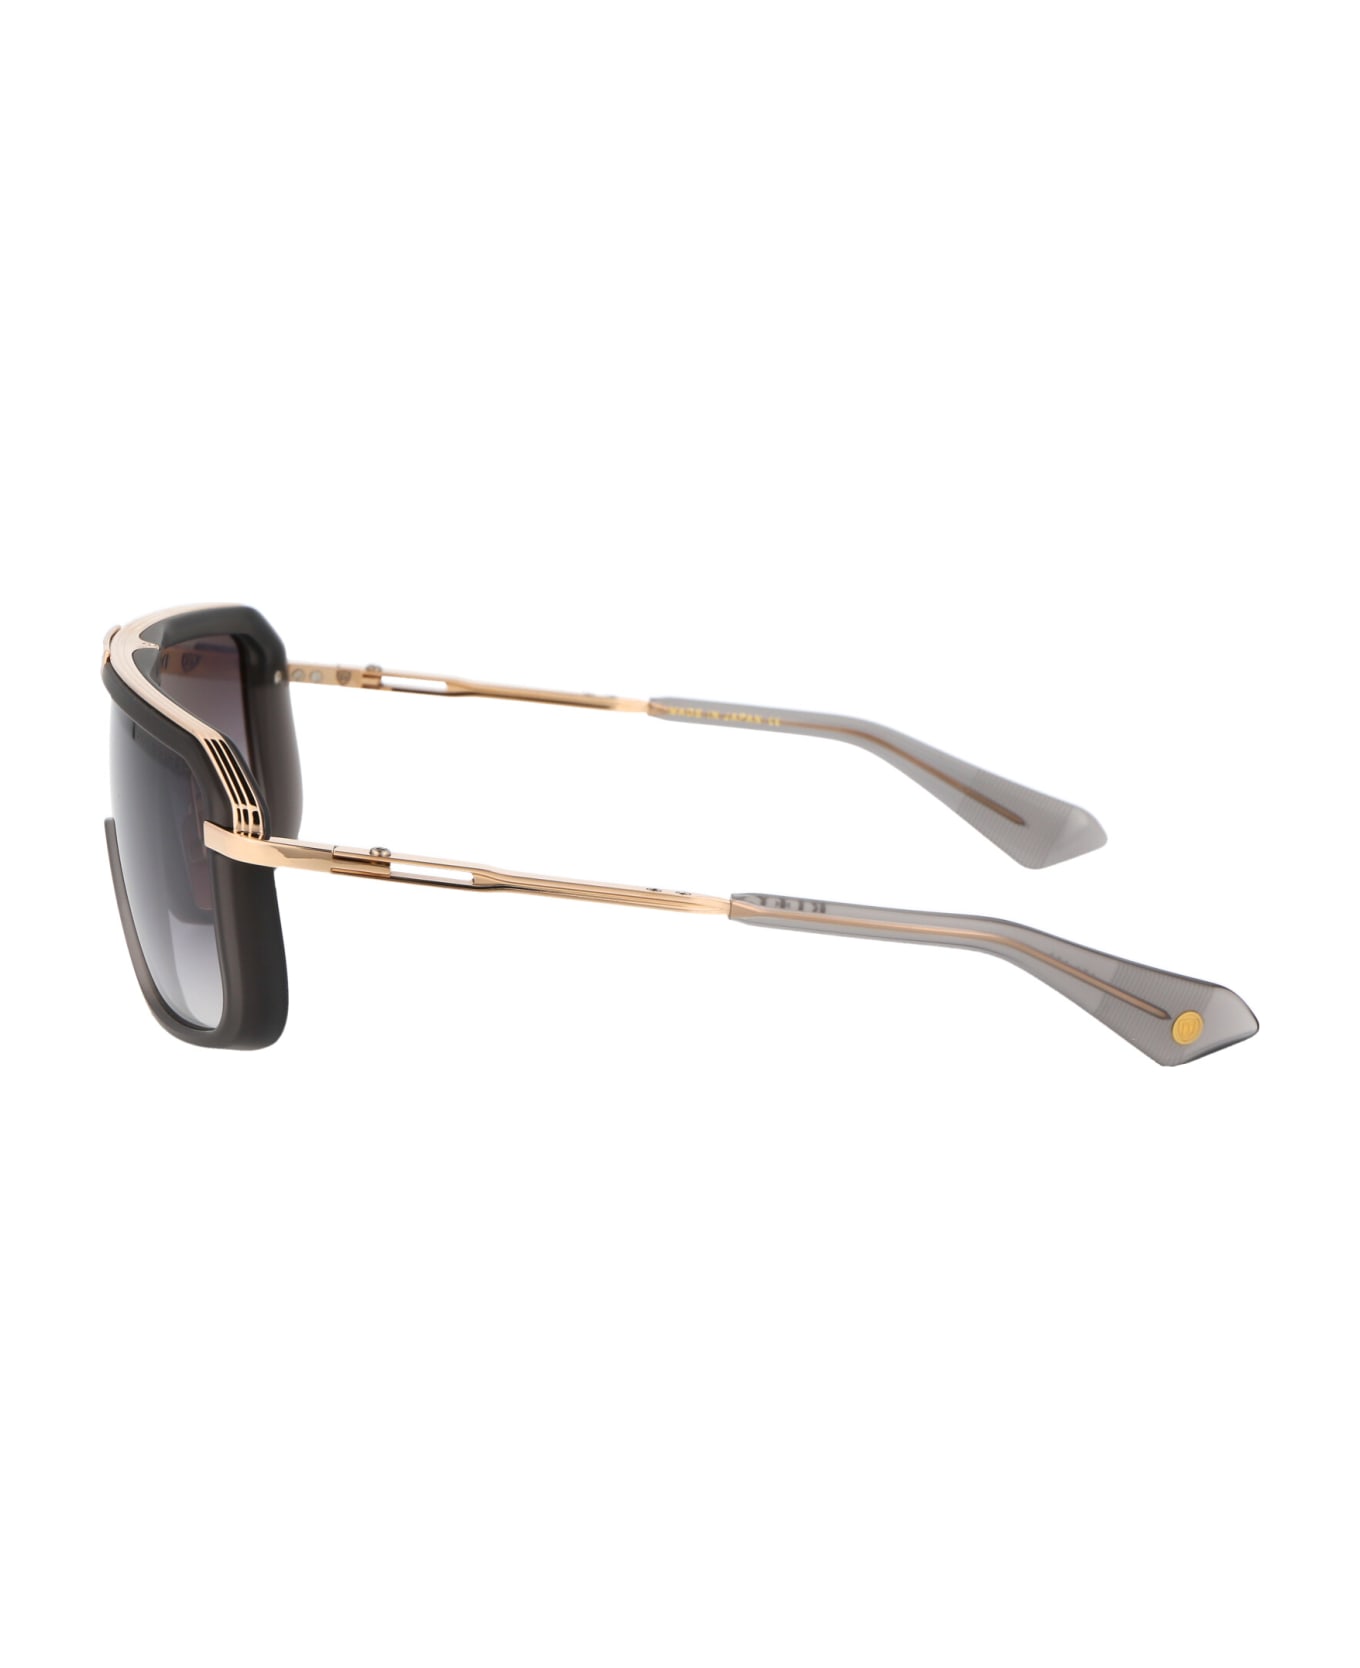 Dita Mach-eight Sunglasses - Satin Crystal Grey - White Gold to Clear